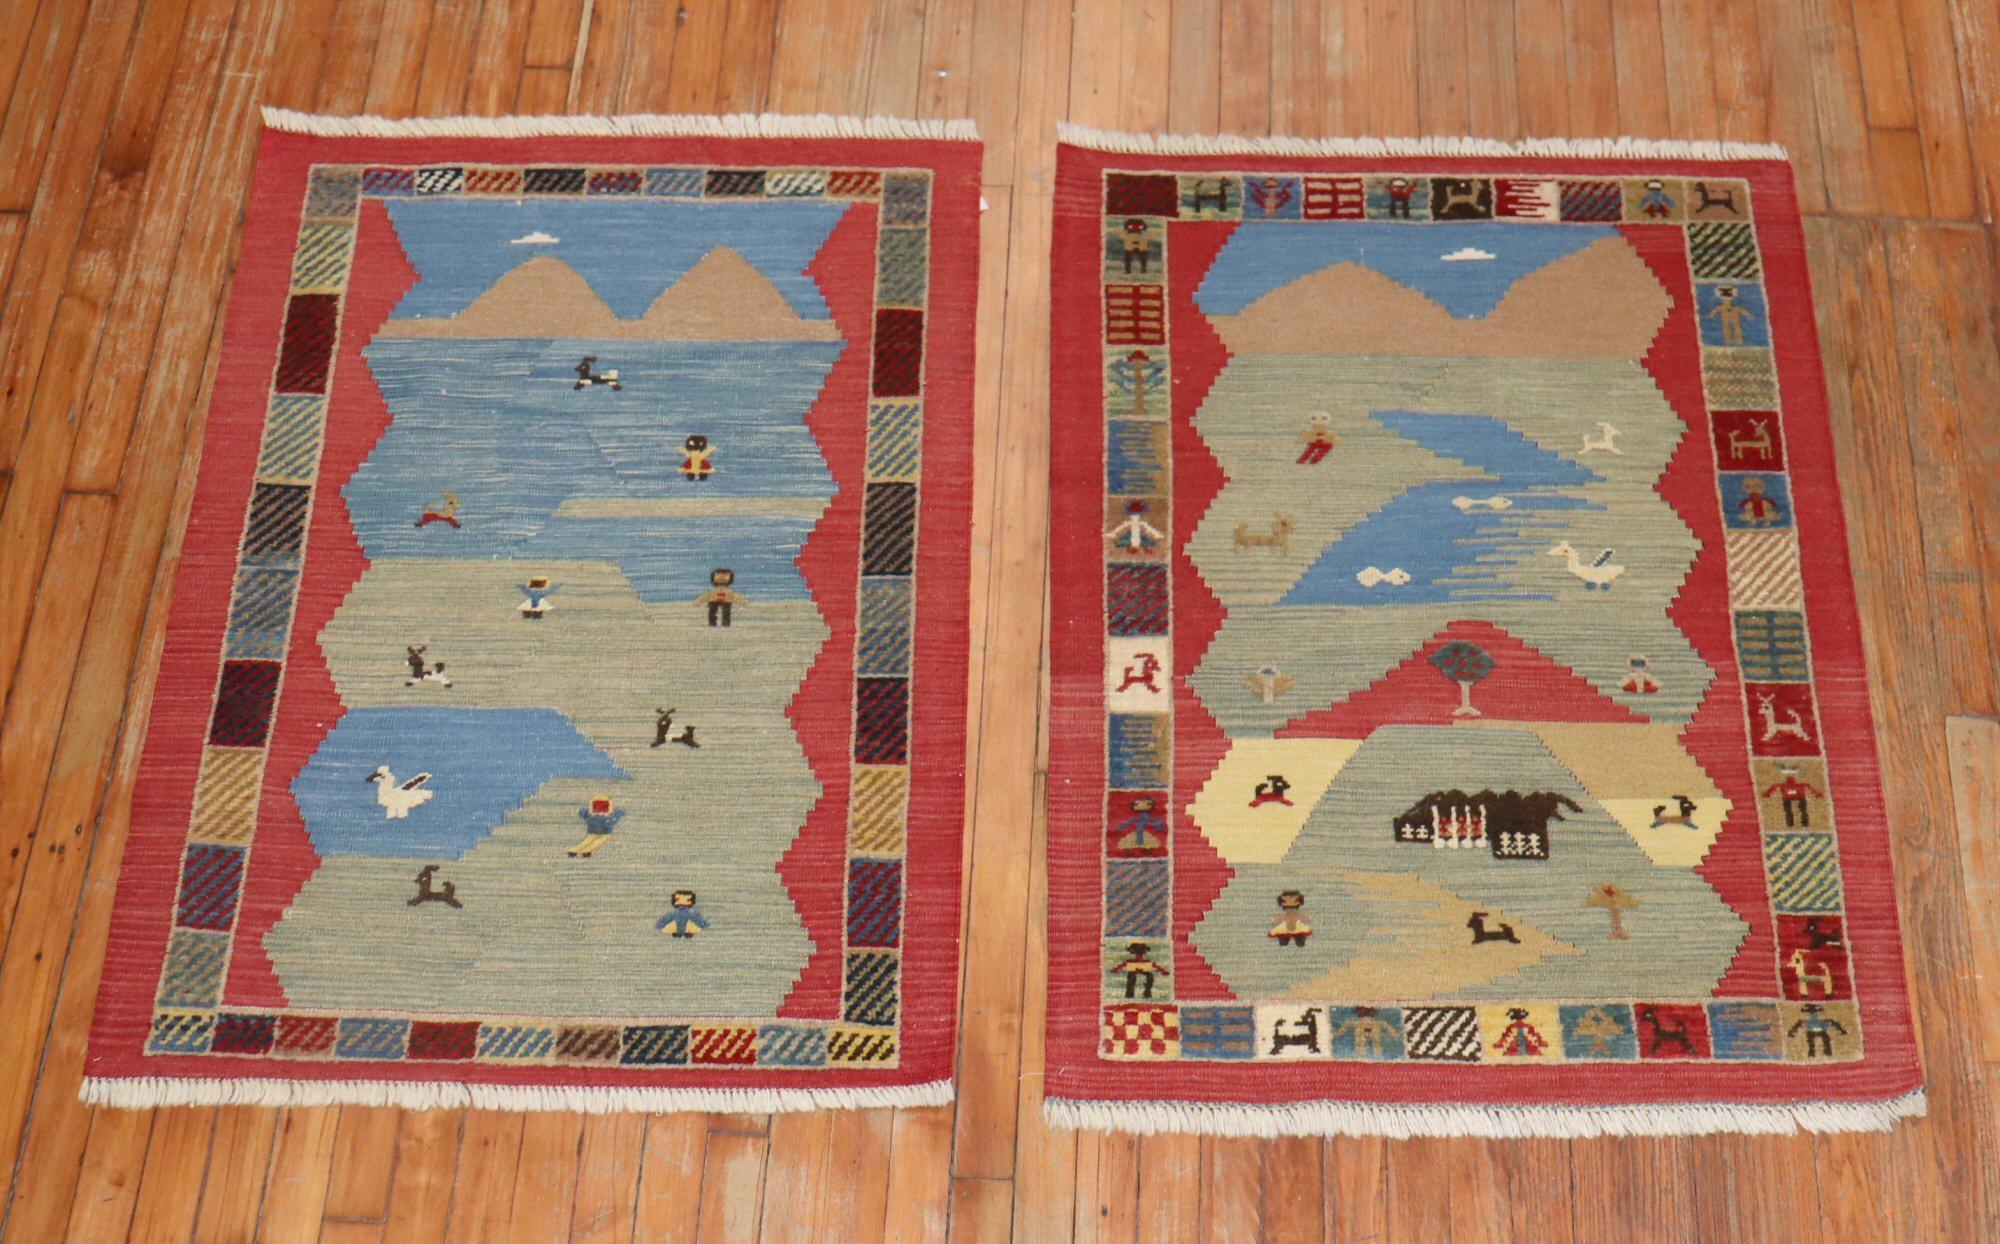 Set of mid-20th century Souf Pictorial Persian Gabbeh carpets .

2'9'' x 3'10'' x 2'8' x 3'10'' respectively

Souf rugs are very rare technique found as they have a raised low and high pile technique. They are popular in Iran and little